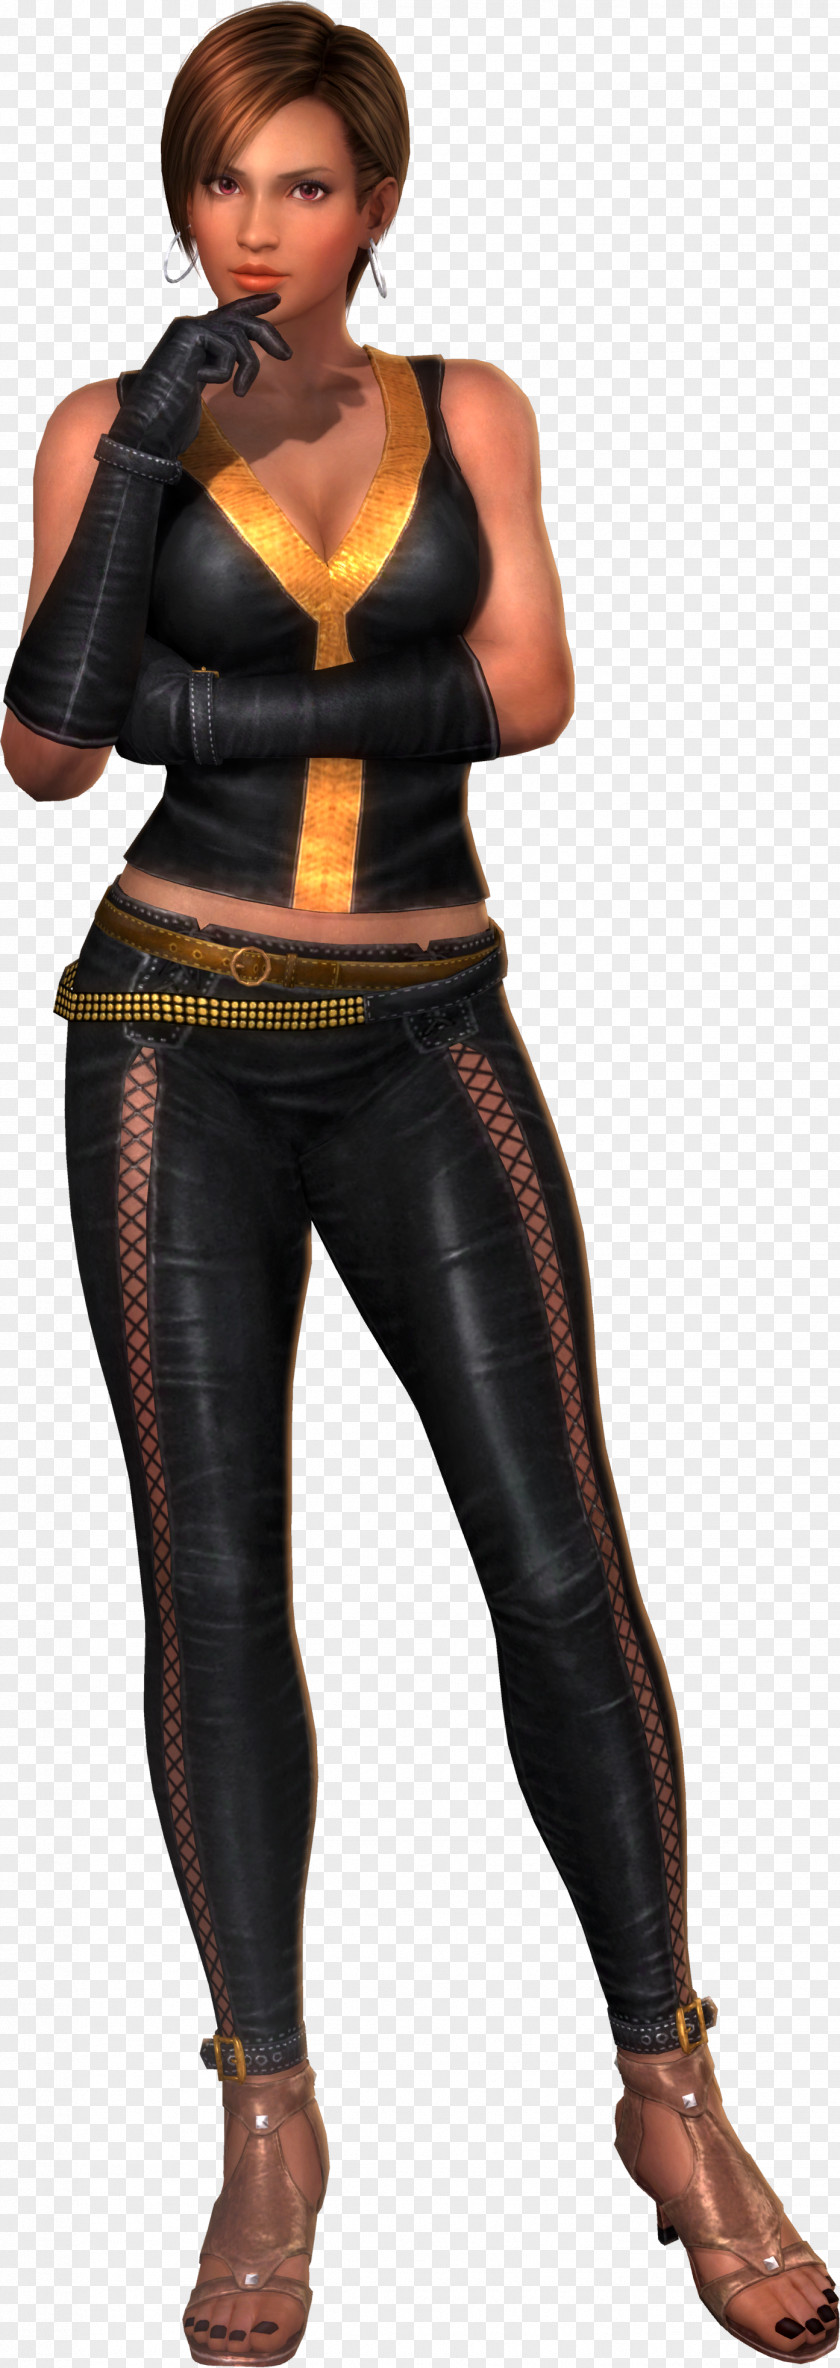 Dead Rising Lisa Hamilton Or Alive 5 Last Round 4 Xtreme Beach Volleyball PNG